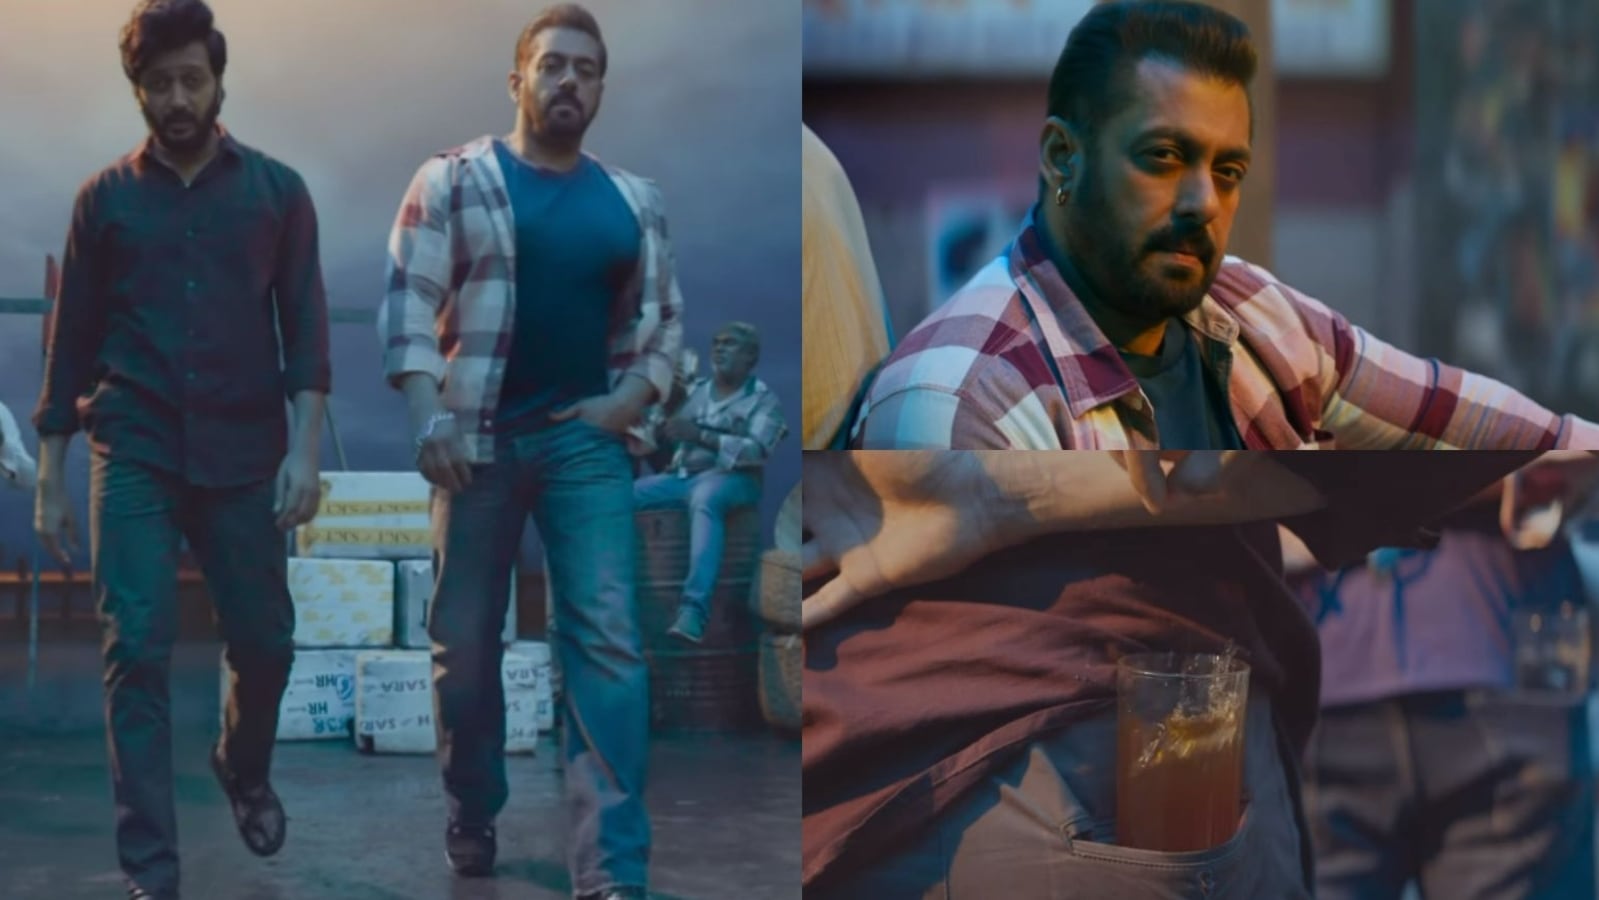 Salman Khan dances with a glass in his pocket in Riteish Deshmukh-starrer Ved song teaser, fans call it ‘new trend’